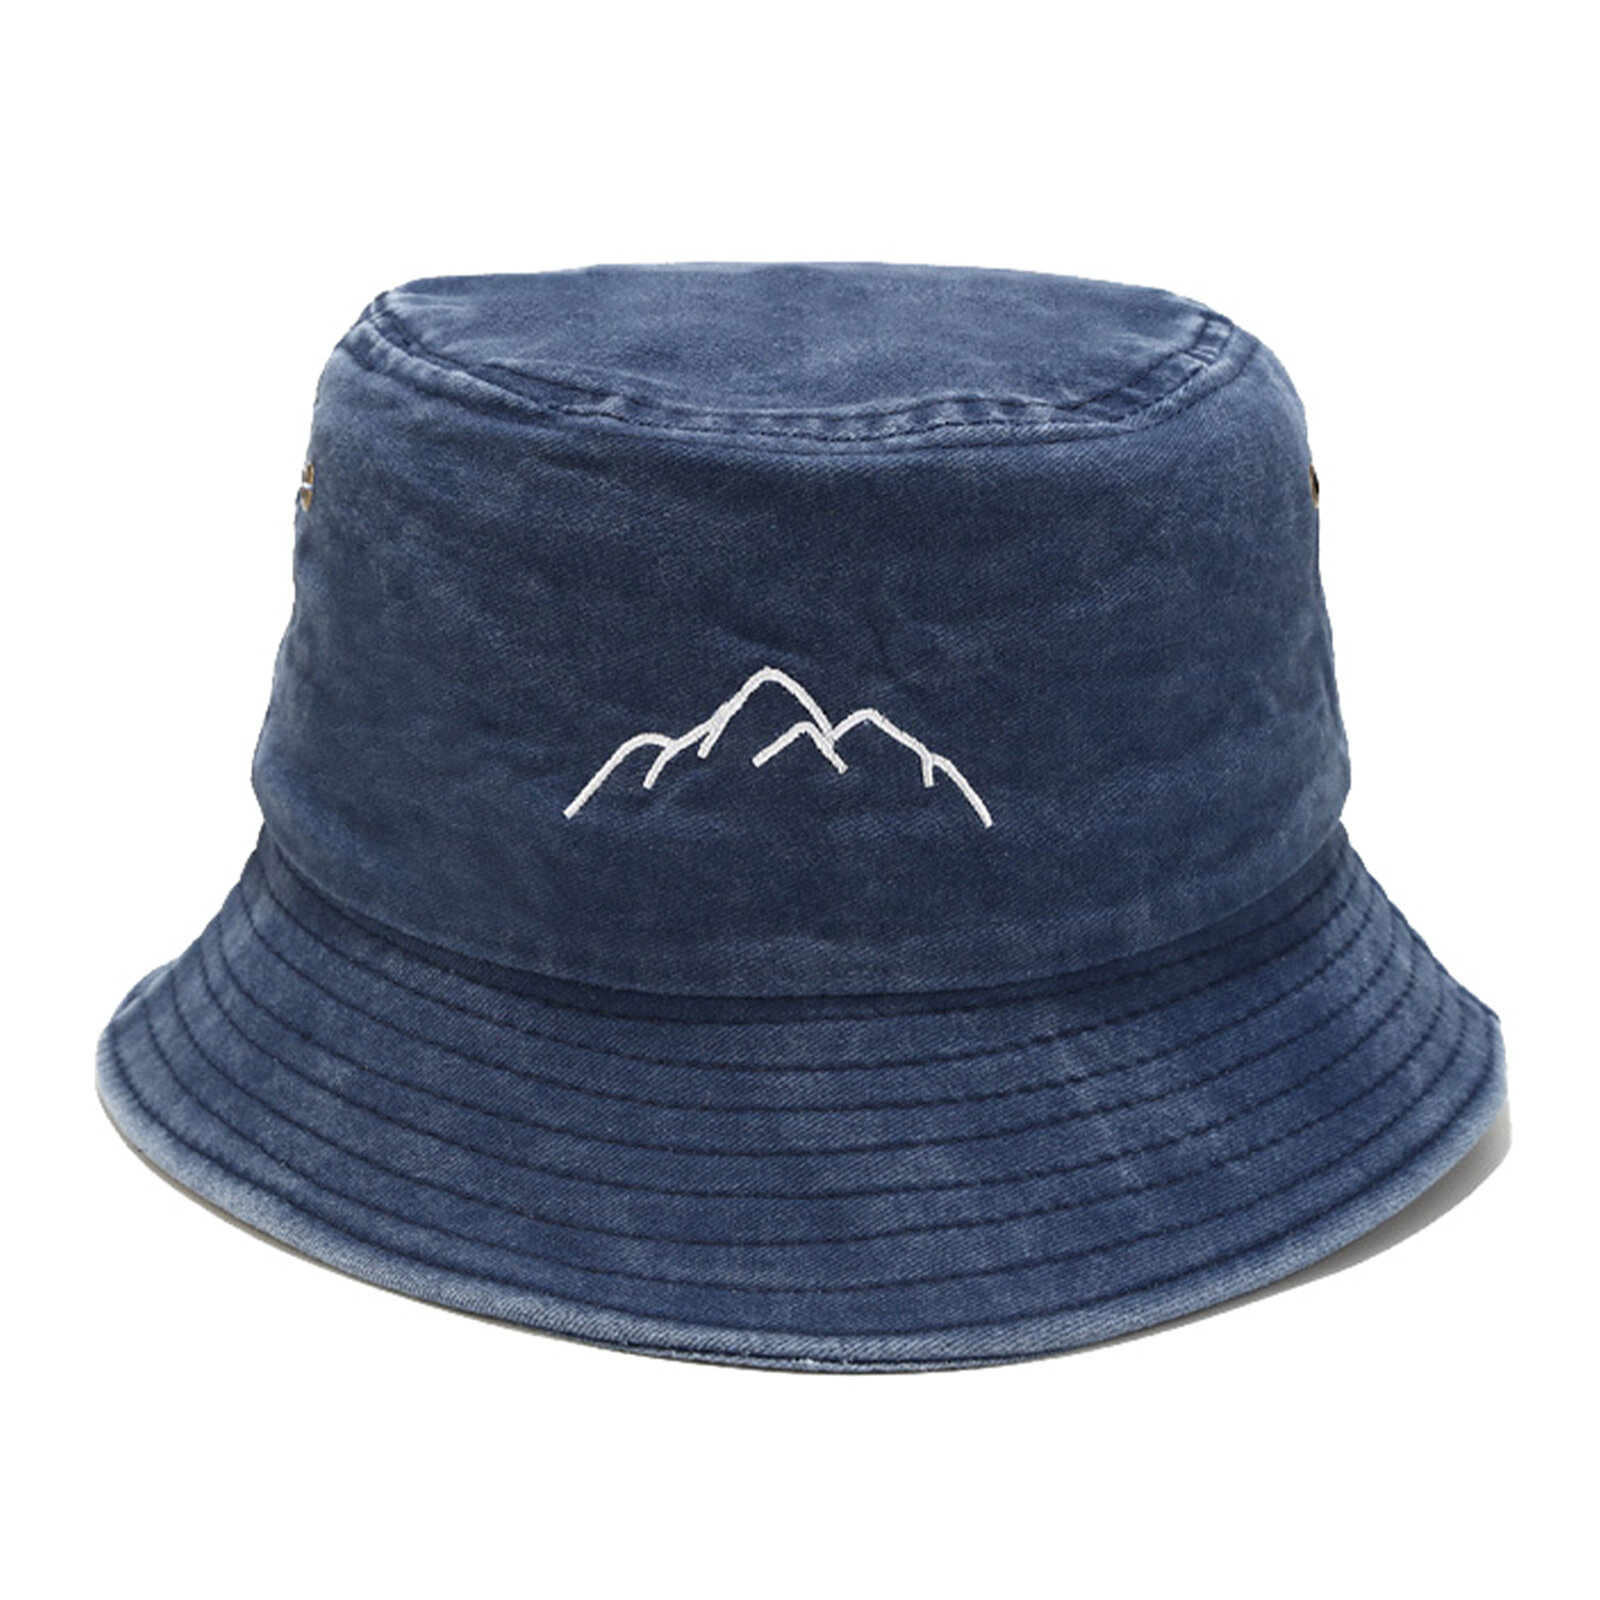 

Jassy Men's Cotton Vintage Washed Embroidered Bucket Hat Outdoor Sports Mountaineering Fishing Hat